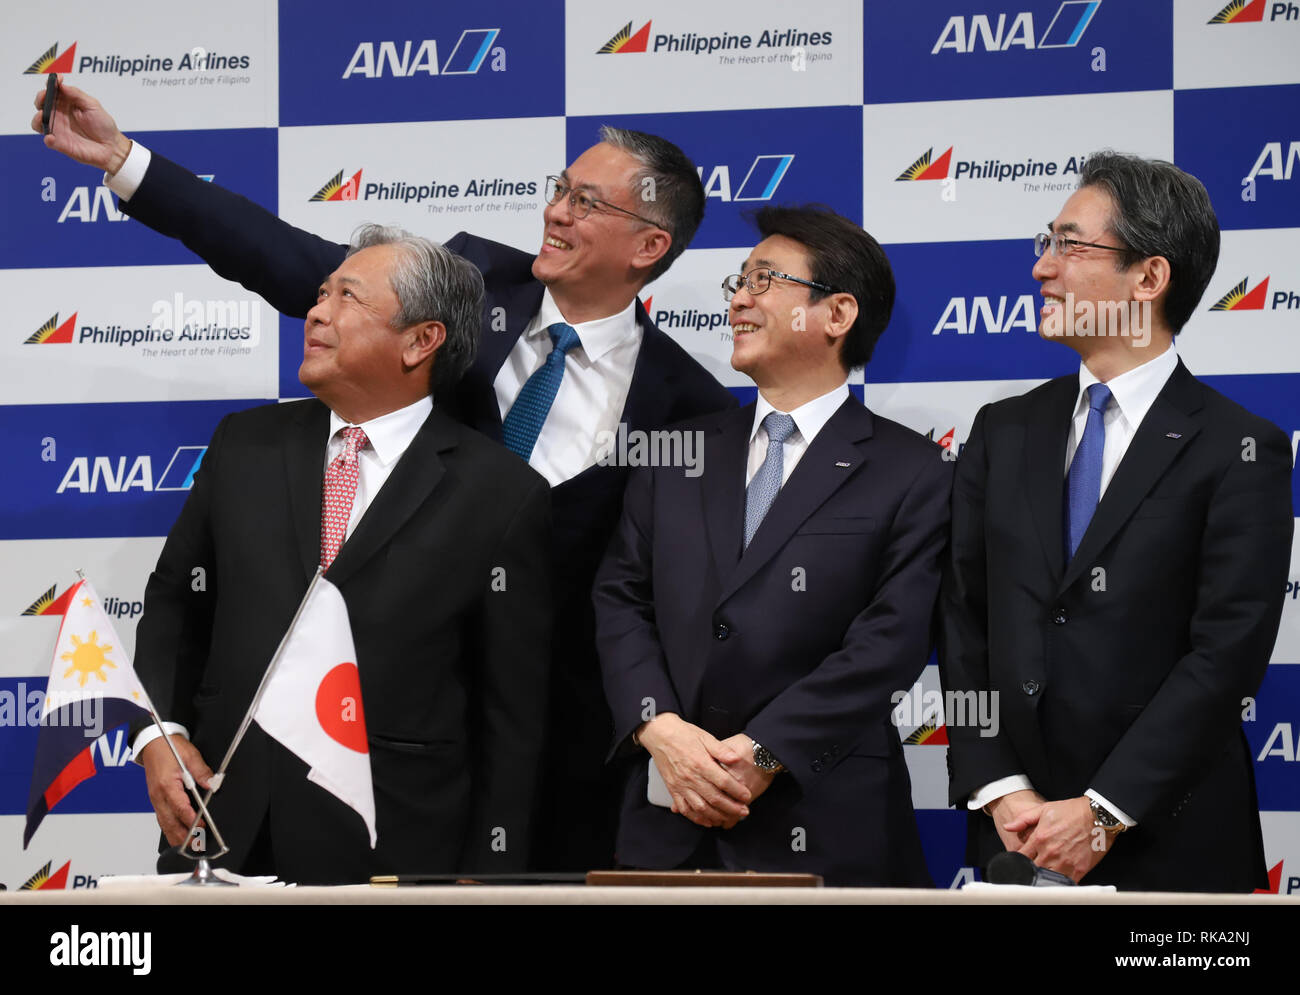 Tokyo, Japan. 8th Feb, 2019. (L-R) Philippine Airlines (PAL) president Jaime Bautista, LT Group president and PAL Holdings director Michael Tan, ANA Holdings president Shinya Katanozaka and All Nippon Airways (ANA) president Yuji Hirako take their selfies as they announce the companies expand their partnerships in Tokyo on Friday, February 8, 2019. ANA Holdings will invest 95 million U.S. dollars to PAL Holdings and acquire 9.5 percent of PAL Holdings shares. Credit: Yoshio Tsunoda/AFLO/Alamy Live News Stock Photo